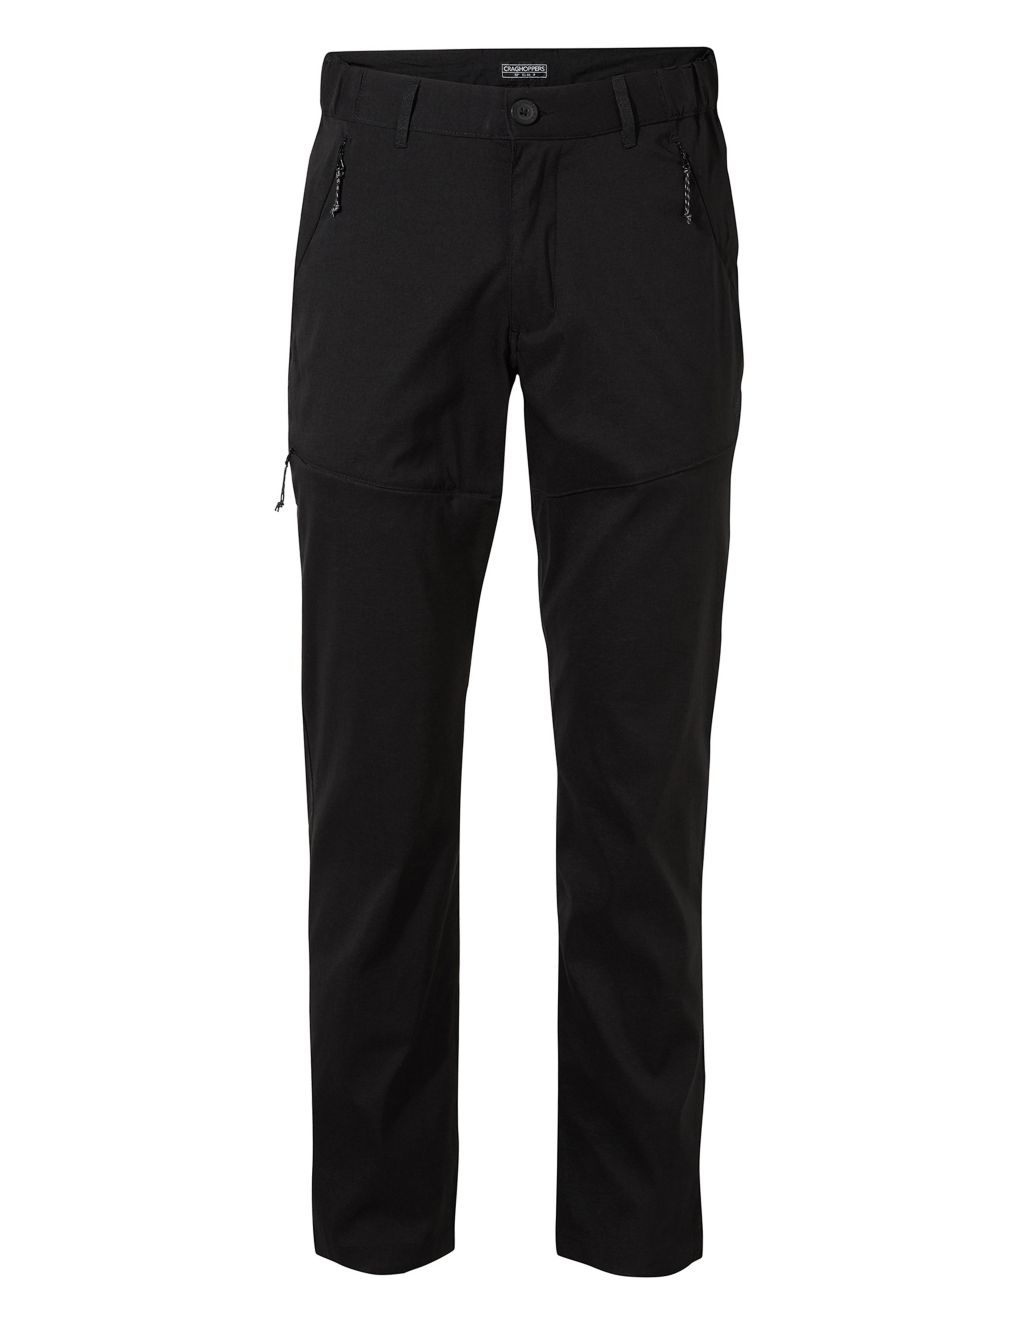 Tailored Fit Cargo Trousers image 2